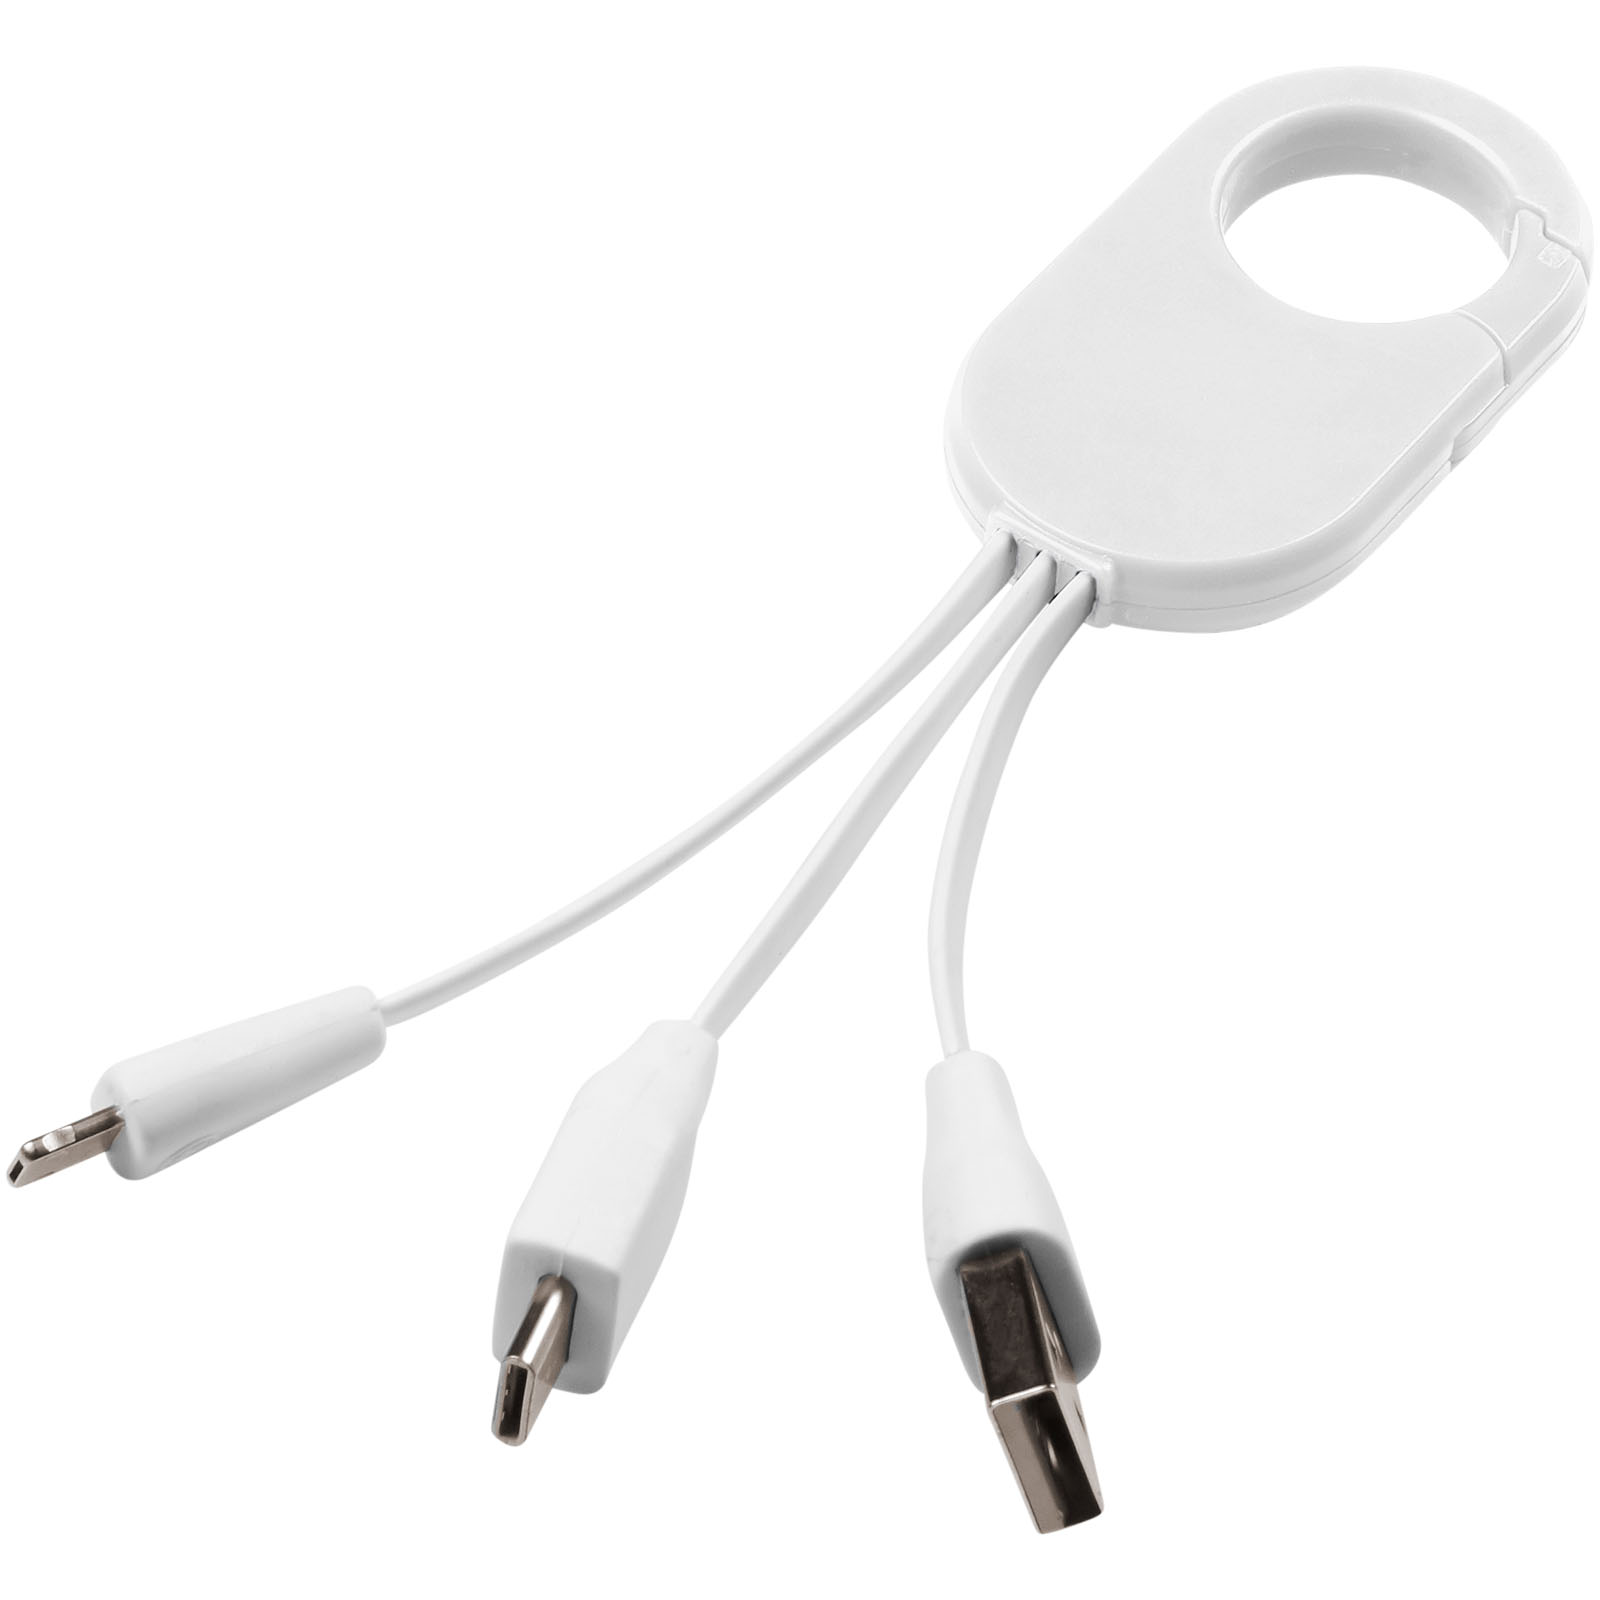 Technology - Troop 3-in-1 charging cable